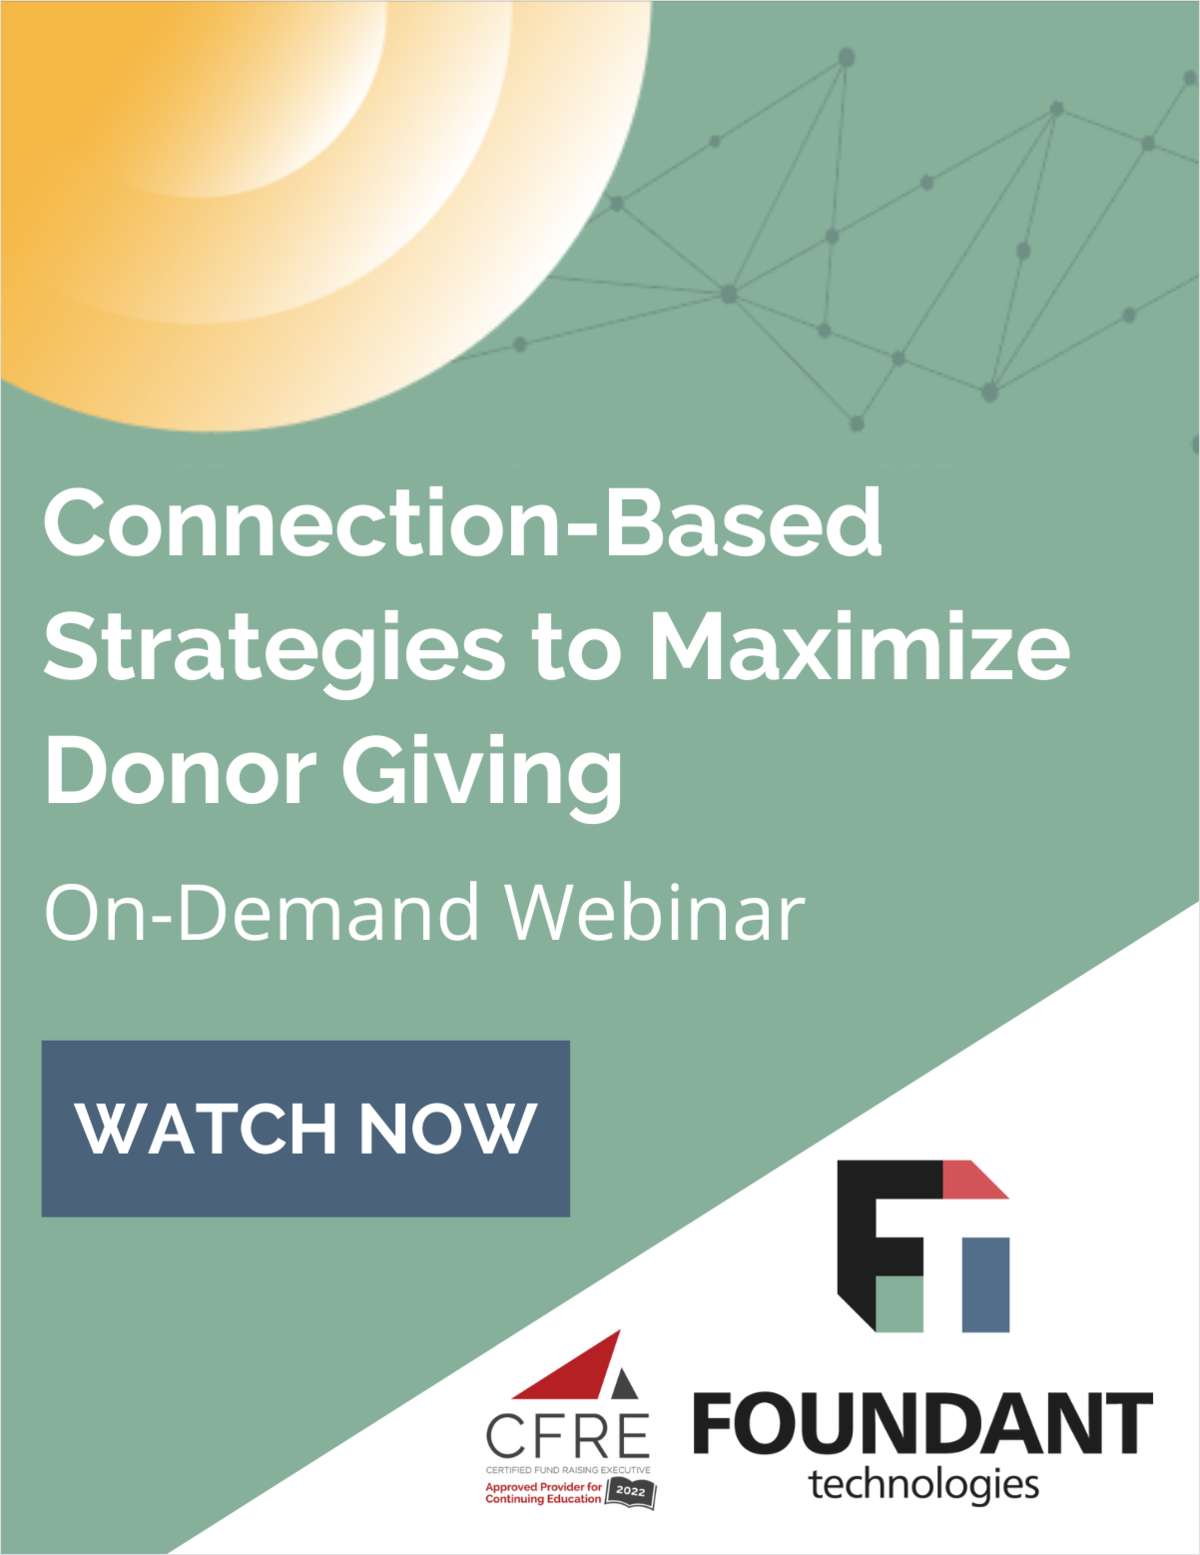 Connection-Based Strategies to Maximize Donor Giving